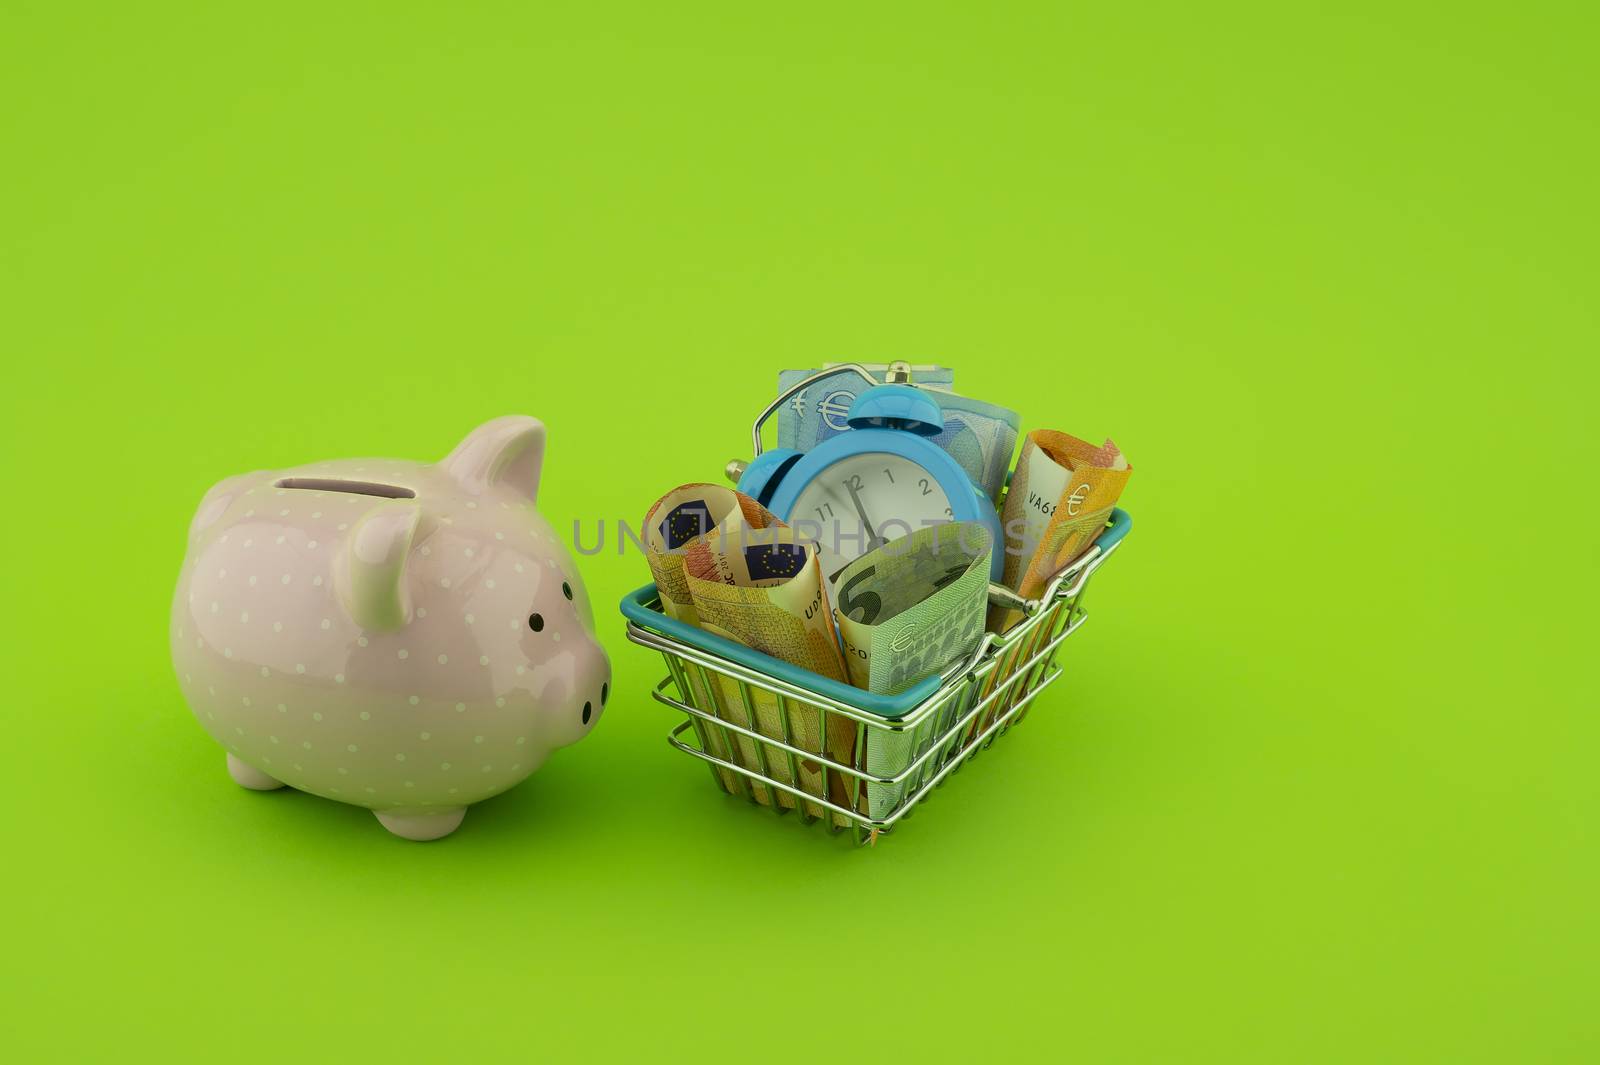 Shopping concept with ceramic piggy bank, basket filled with cash banknotes and alarm clock over a green background